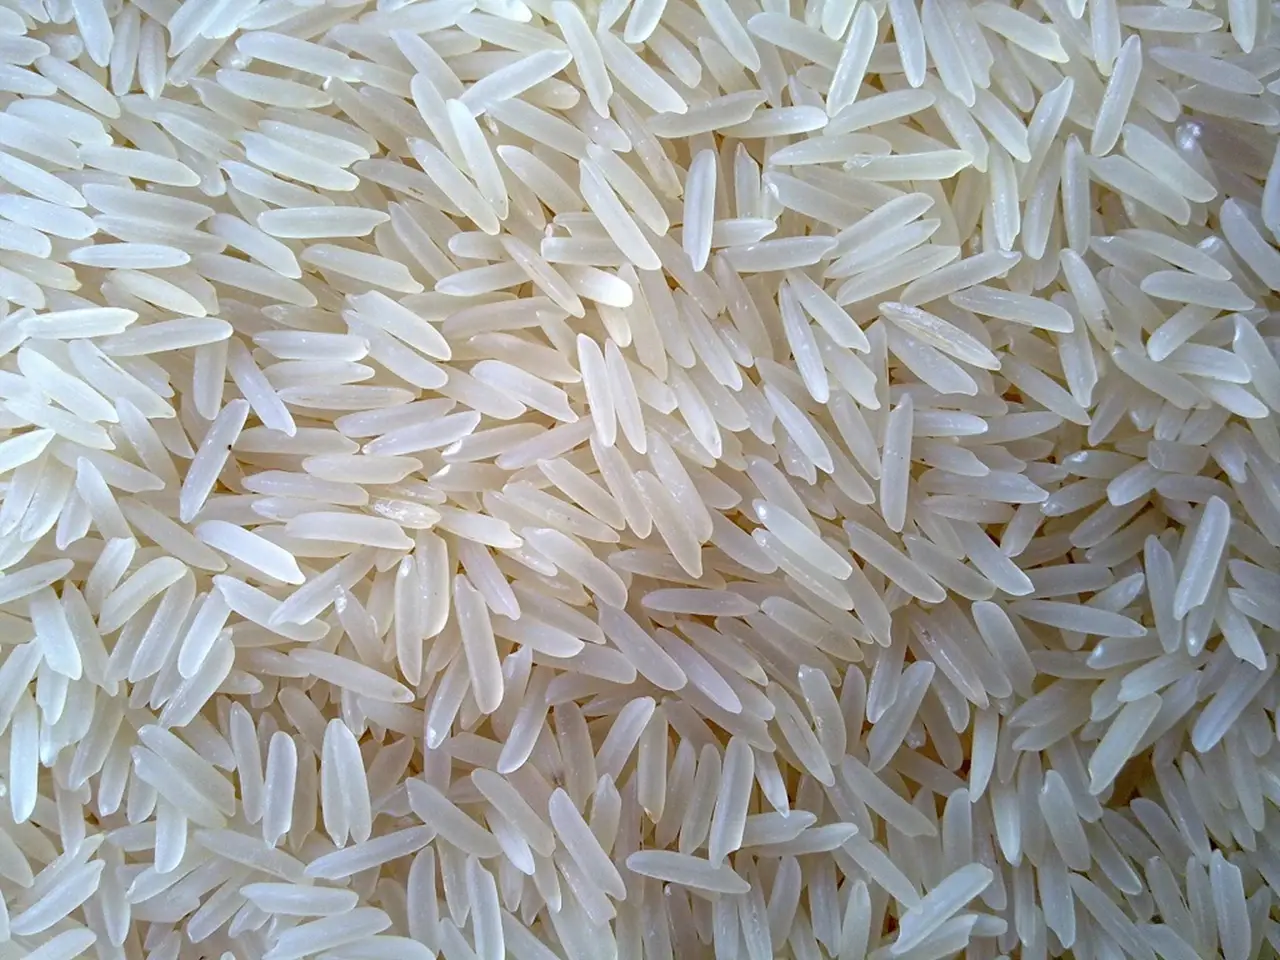 Decision will protect the fragrant  basmati rice’s purity and prevent any dilution